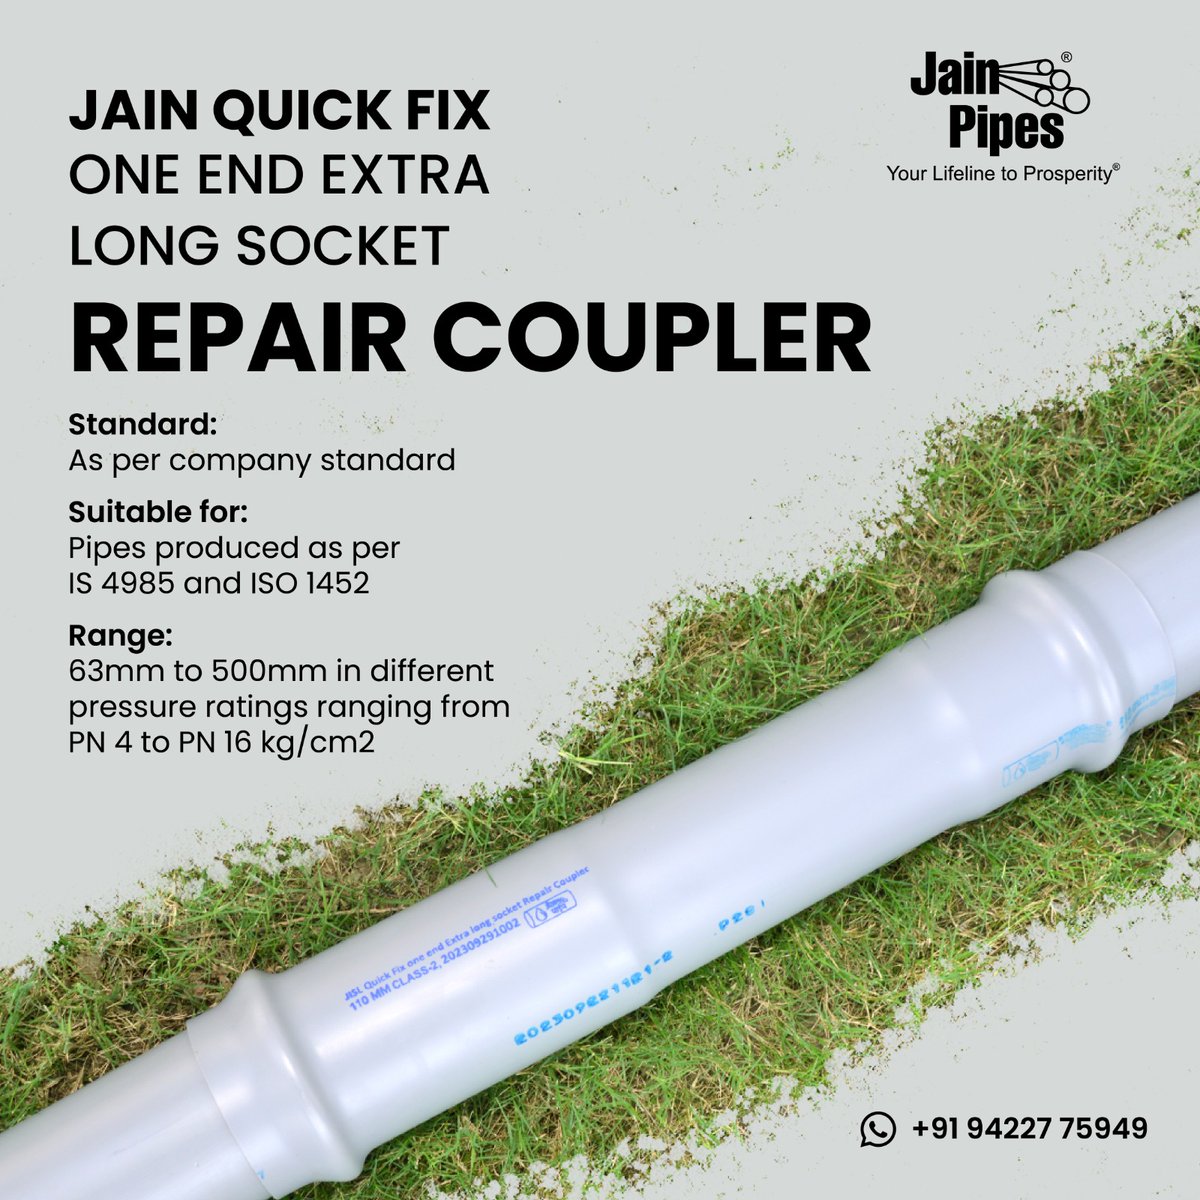 🔧 Introducing the Jain Pipes JAIN QUICK FIX ONE END EXTRA LONG SOCKET REPAIR COUPLER! 🔧
Crafted to our highest company standards, this repair coupler is your go-to solution for seamless pipe fixes.🛠️ 
#JainPipes #PipeRepair #Innovation